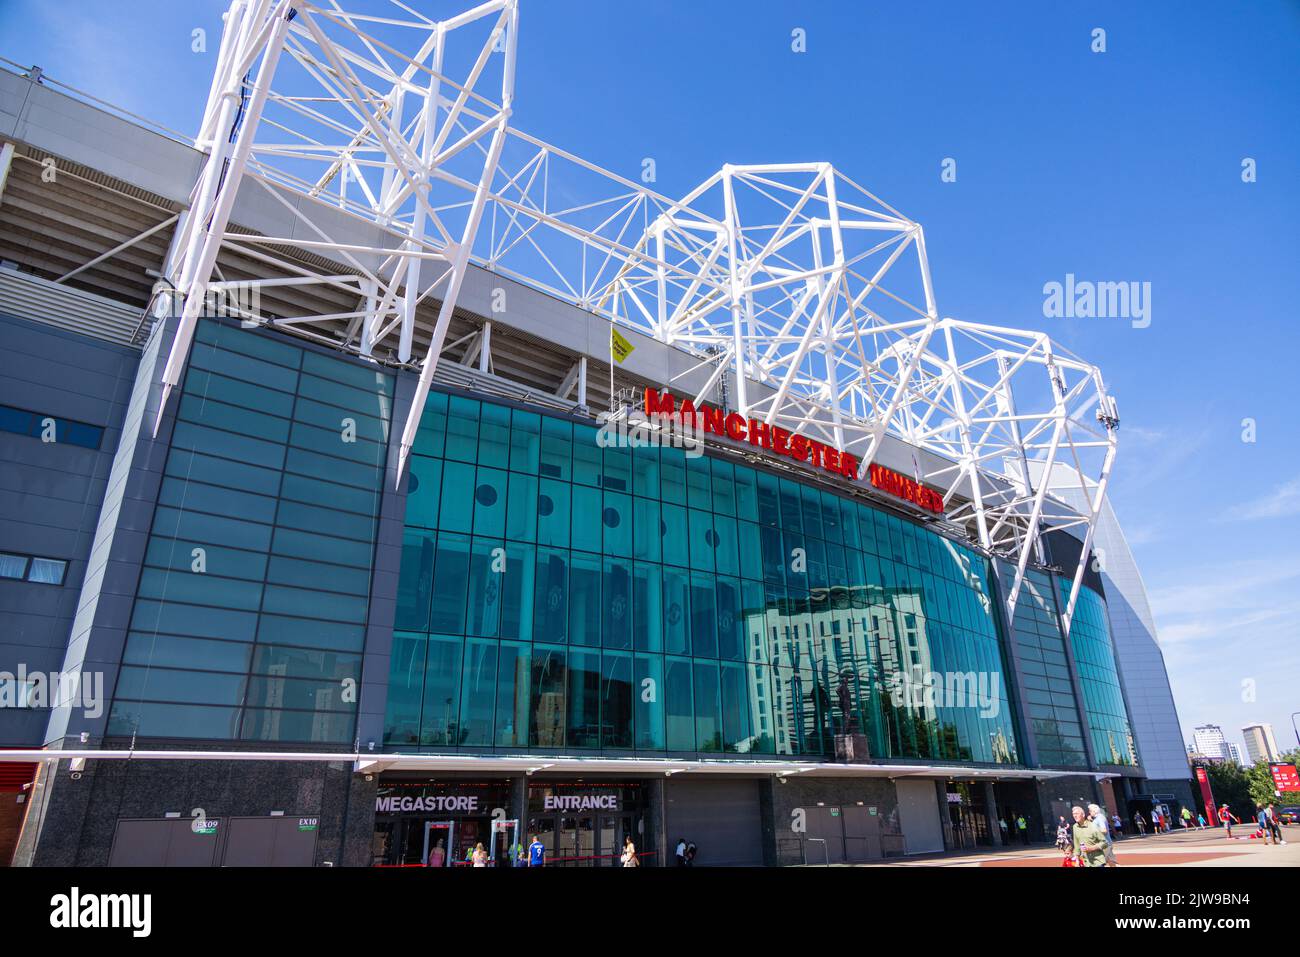 The football stadium of Manchester United - Old Trafford - MANCHESTER, UK - AUGUST 15, 2022 Stock Photo